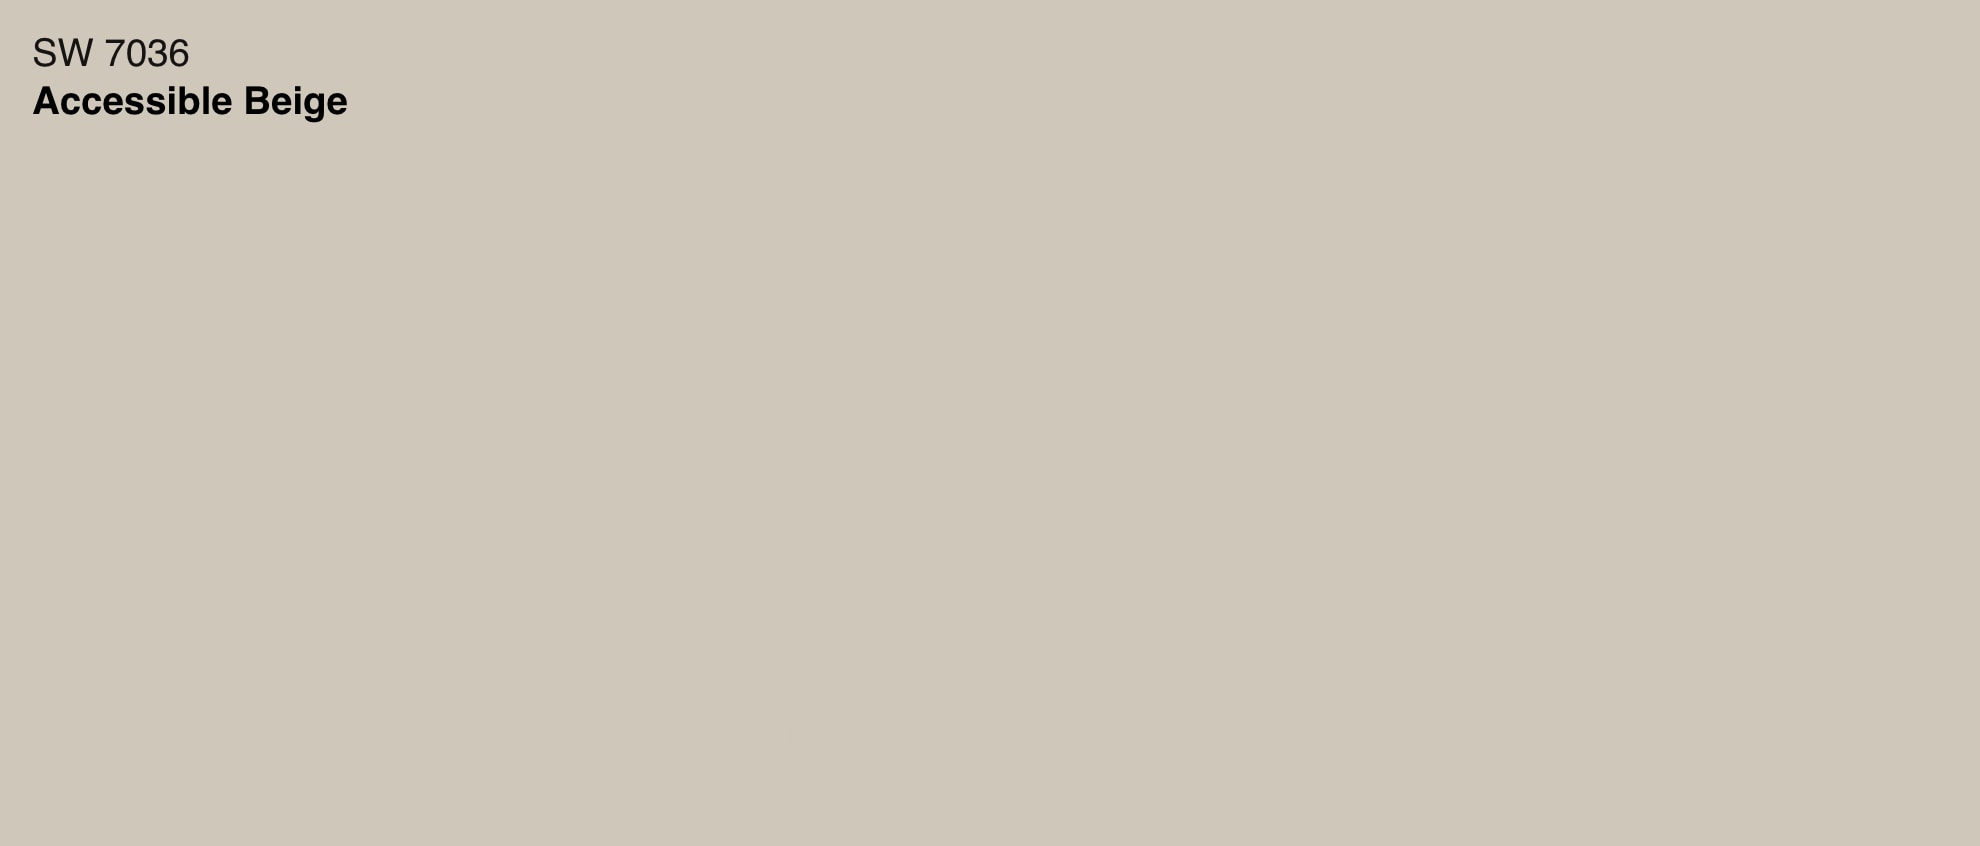 Sherwin Williams Accessible Beige paint color swatch